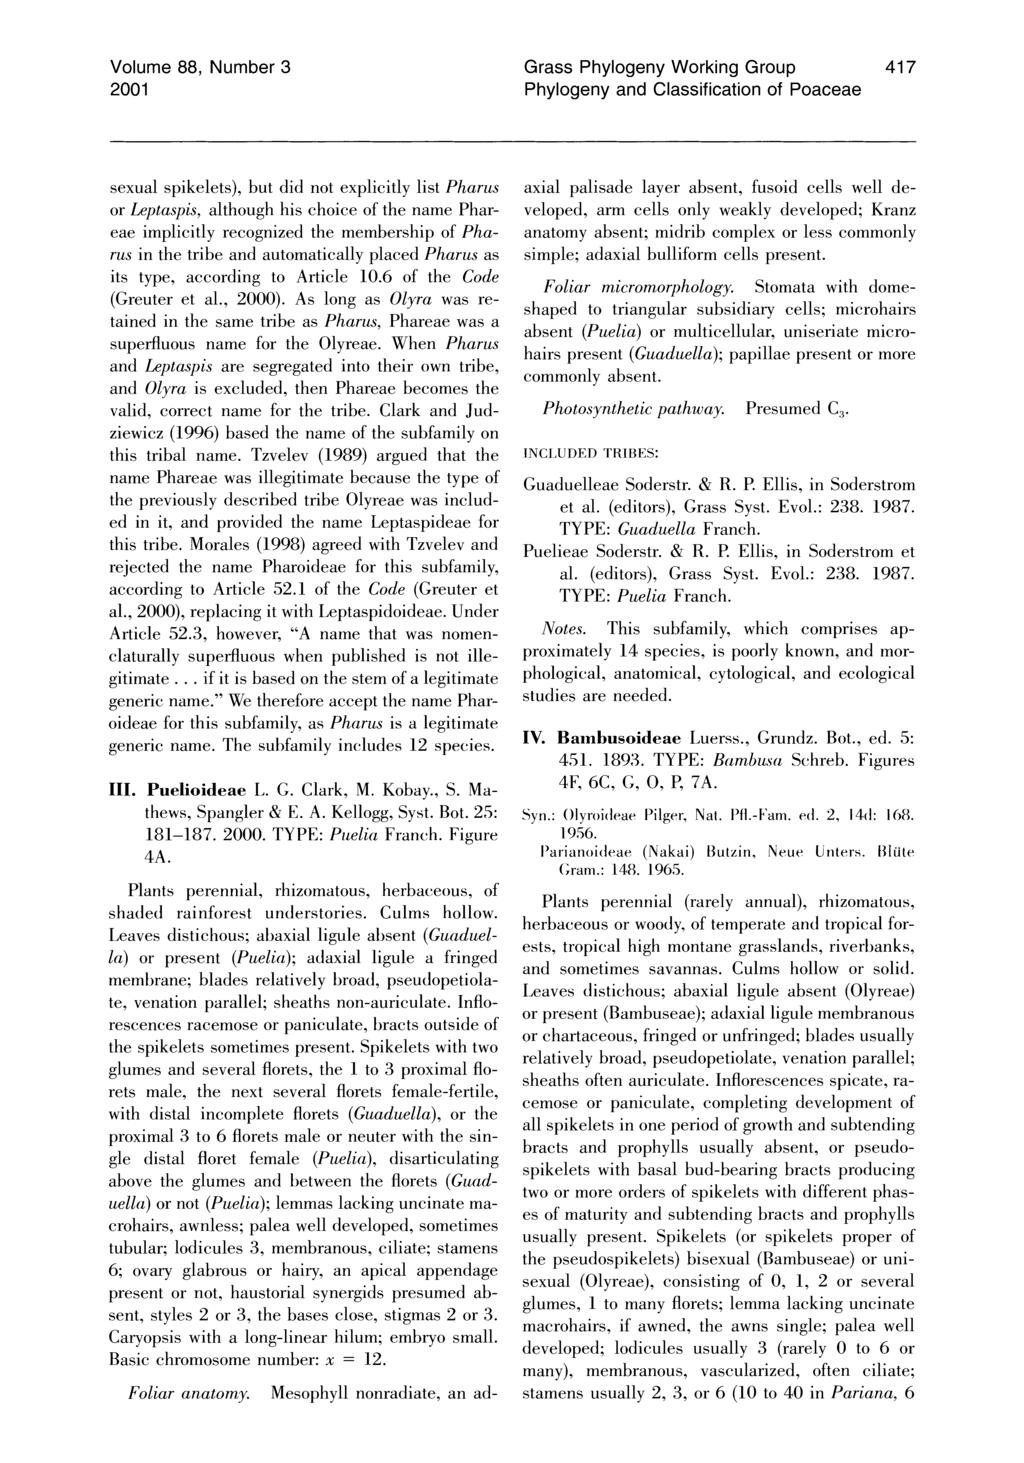 Volume 88, Number 3 2001 Grass Phylogeny Working Group Phylogeny and Classification of Poaceae 417 seual spikelets), but did not eplicitly list Pharus or Leptaspis, although his choice of the name